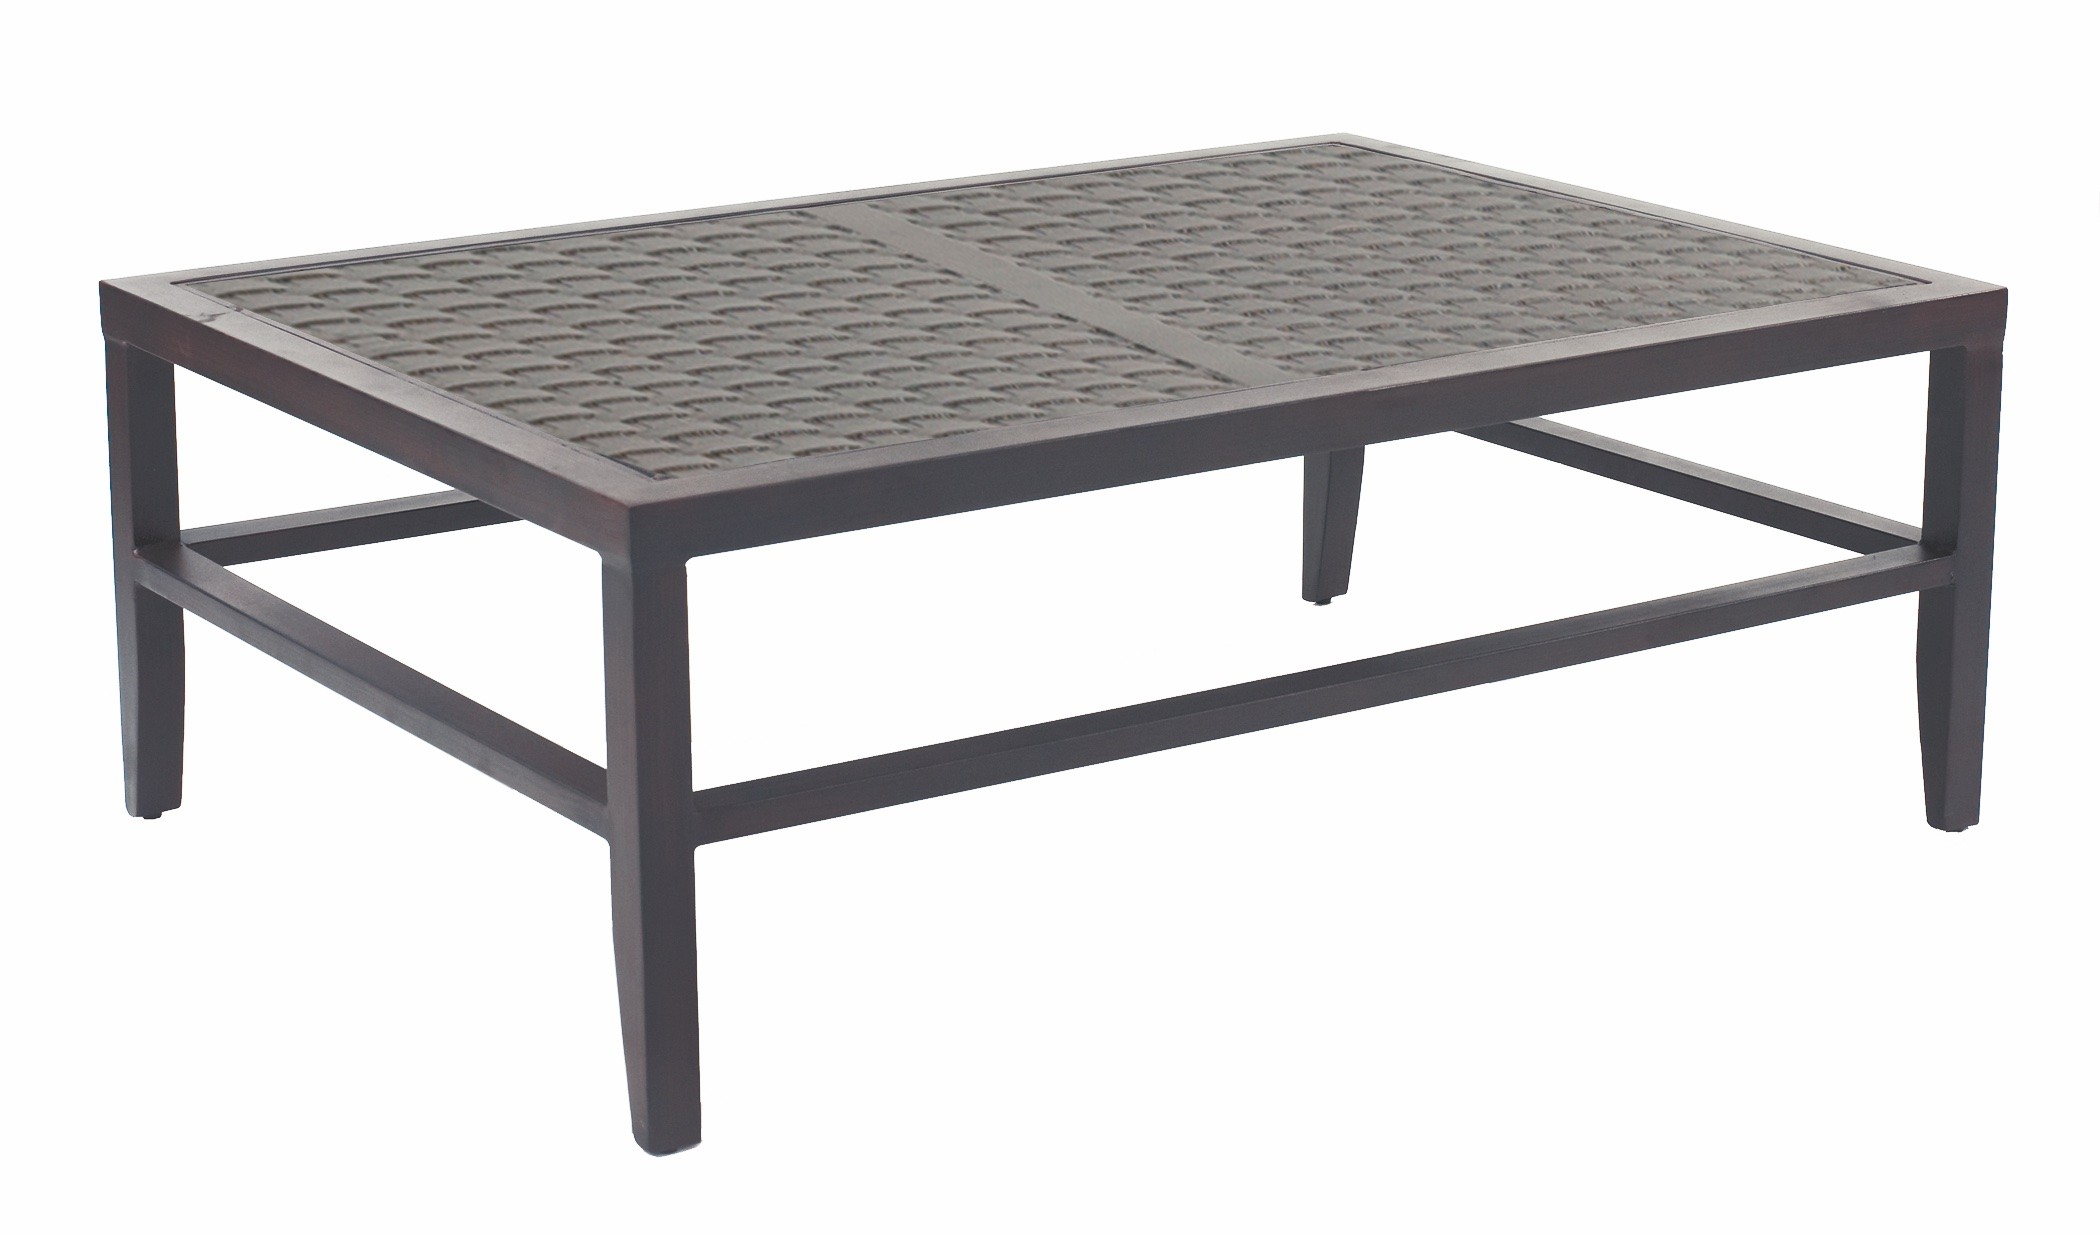 CLASSICAL COFFEE TABLE
SRC3248
SPEC SHEET
